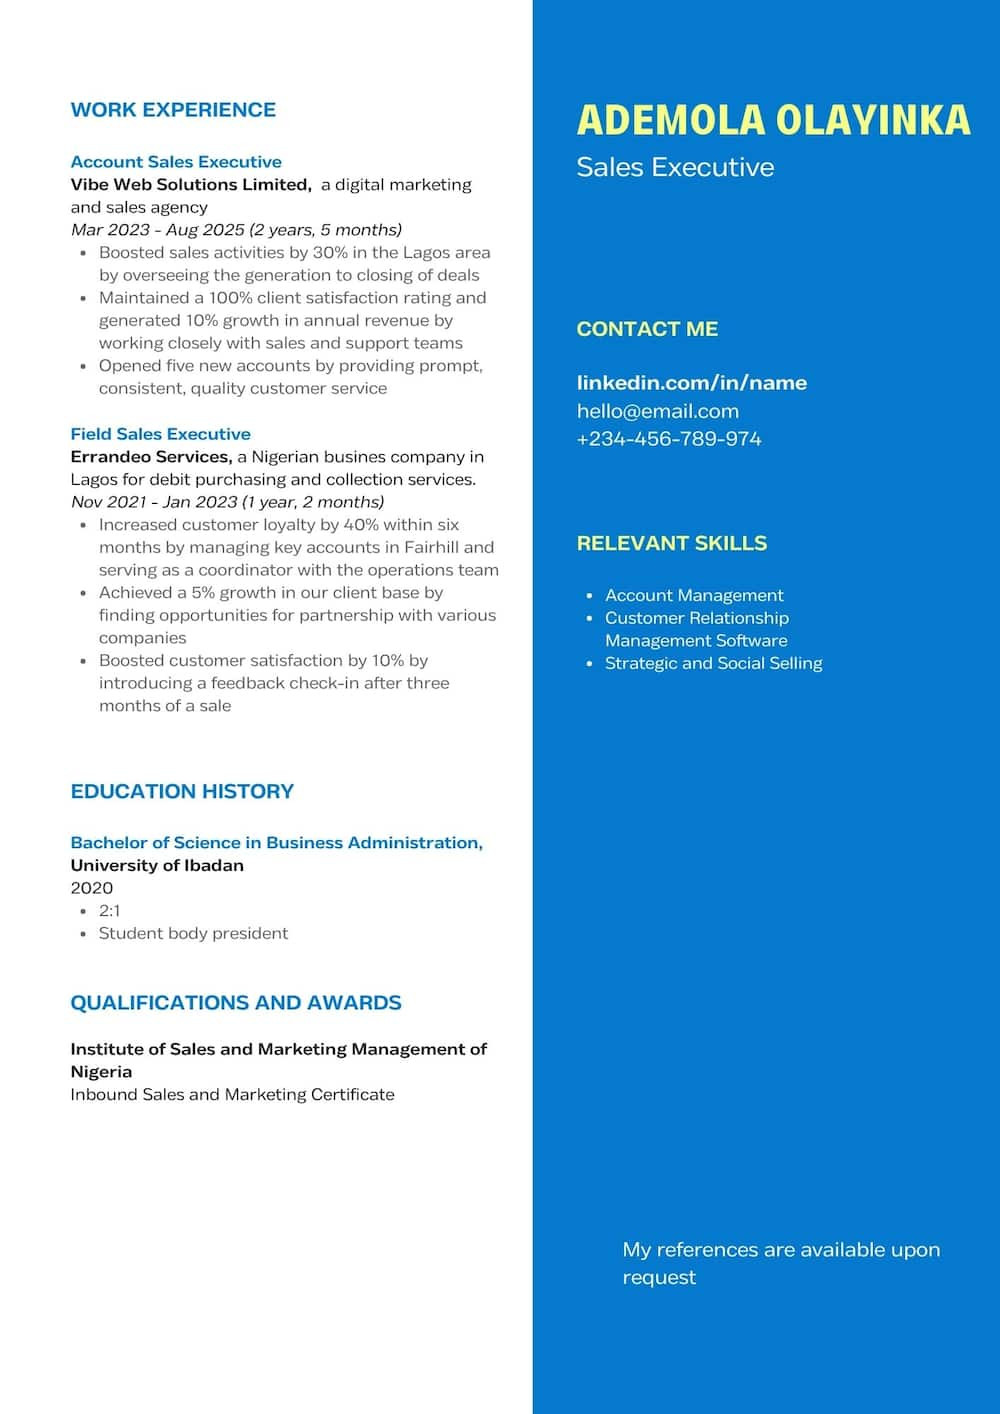 Sample Of A Good Resume In Nigeria Latest Cv format In Nigeria: How to Write the Best Curriculum …